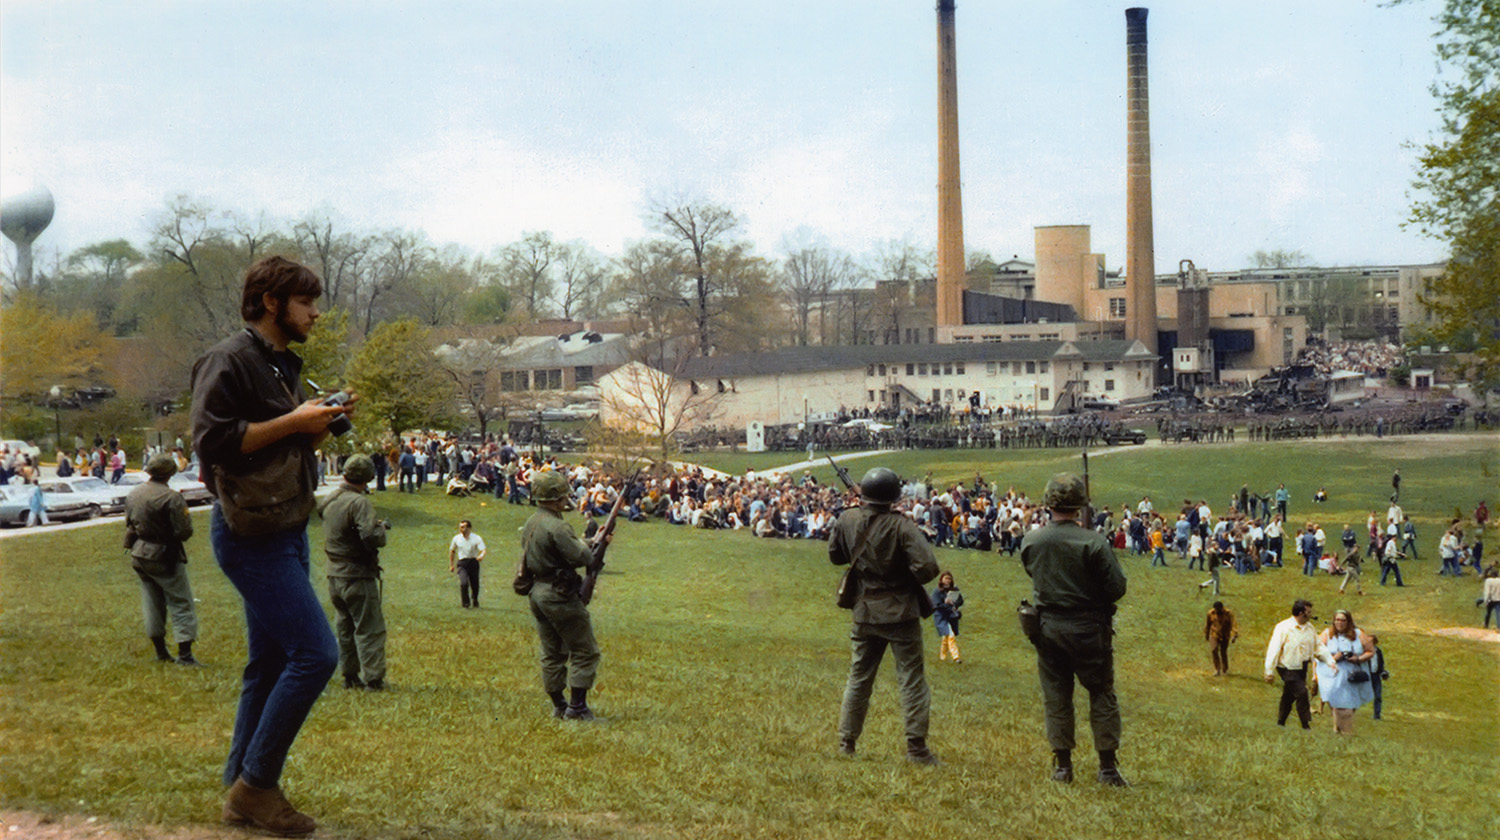 John Filo (left) with camera in hand, overlooking the National Guardsmen and students on May 4, 1970.